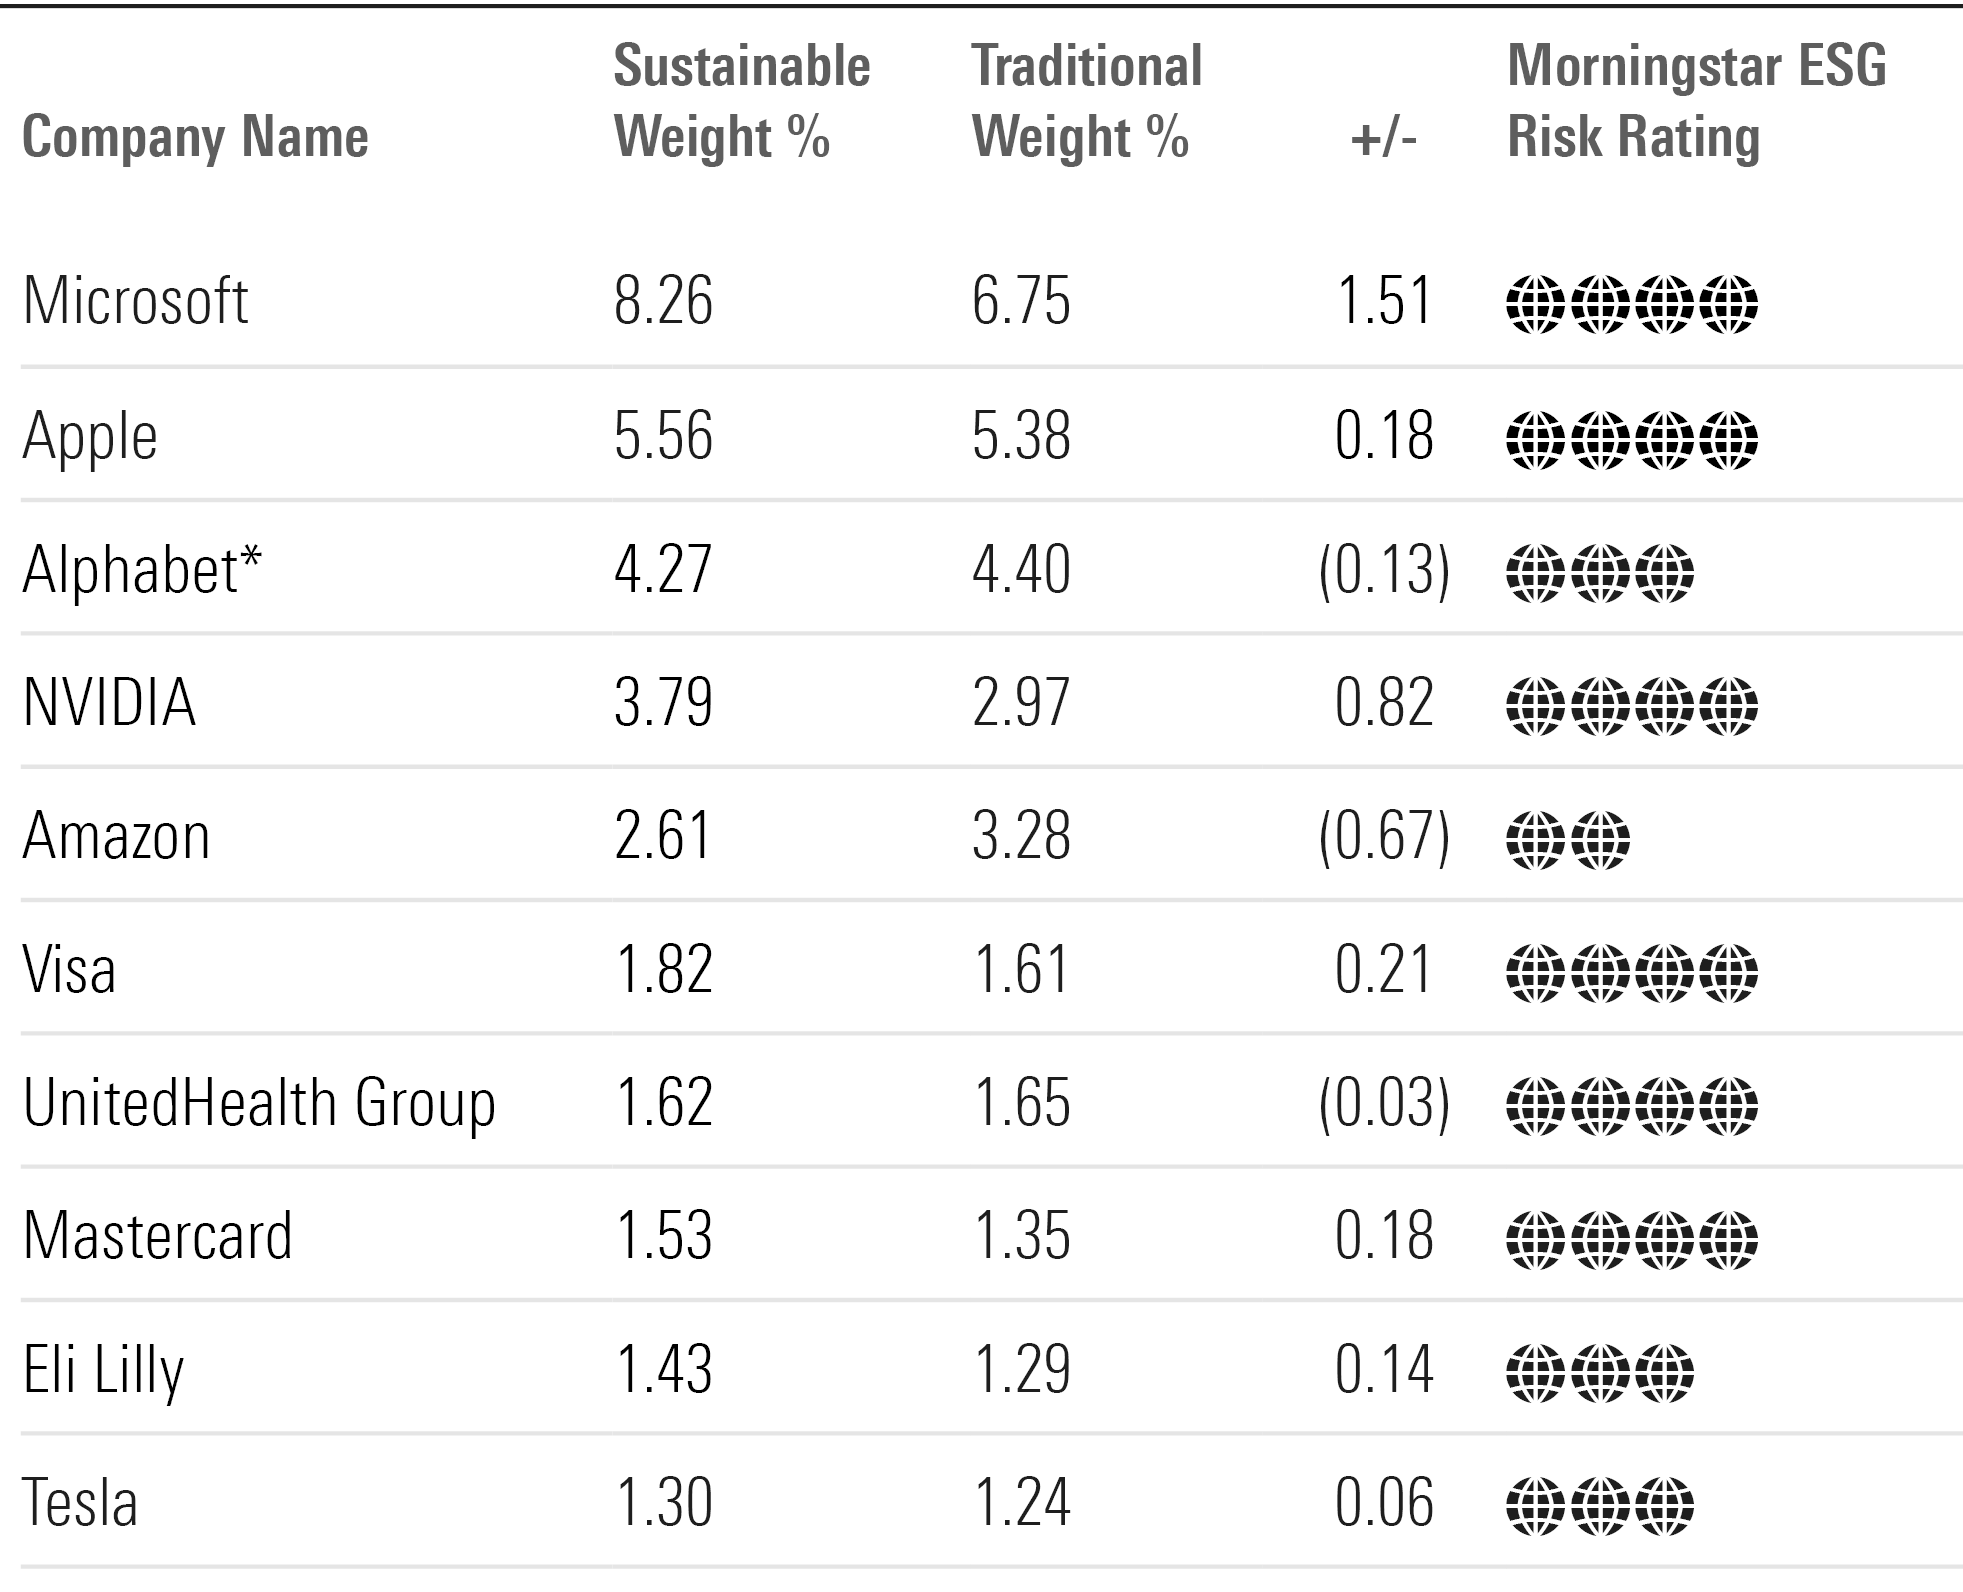 Table of 10 holdings with the highest average weight across the U.S. sustainable large-cap universe, showing the corresponding weights for the traditional universe, the difference between the two, and the stocks' Morningstar ESG Risk Rating Assessment.